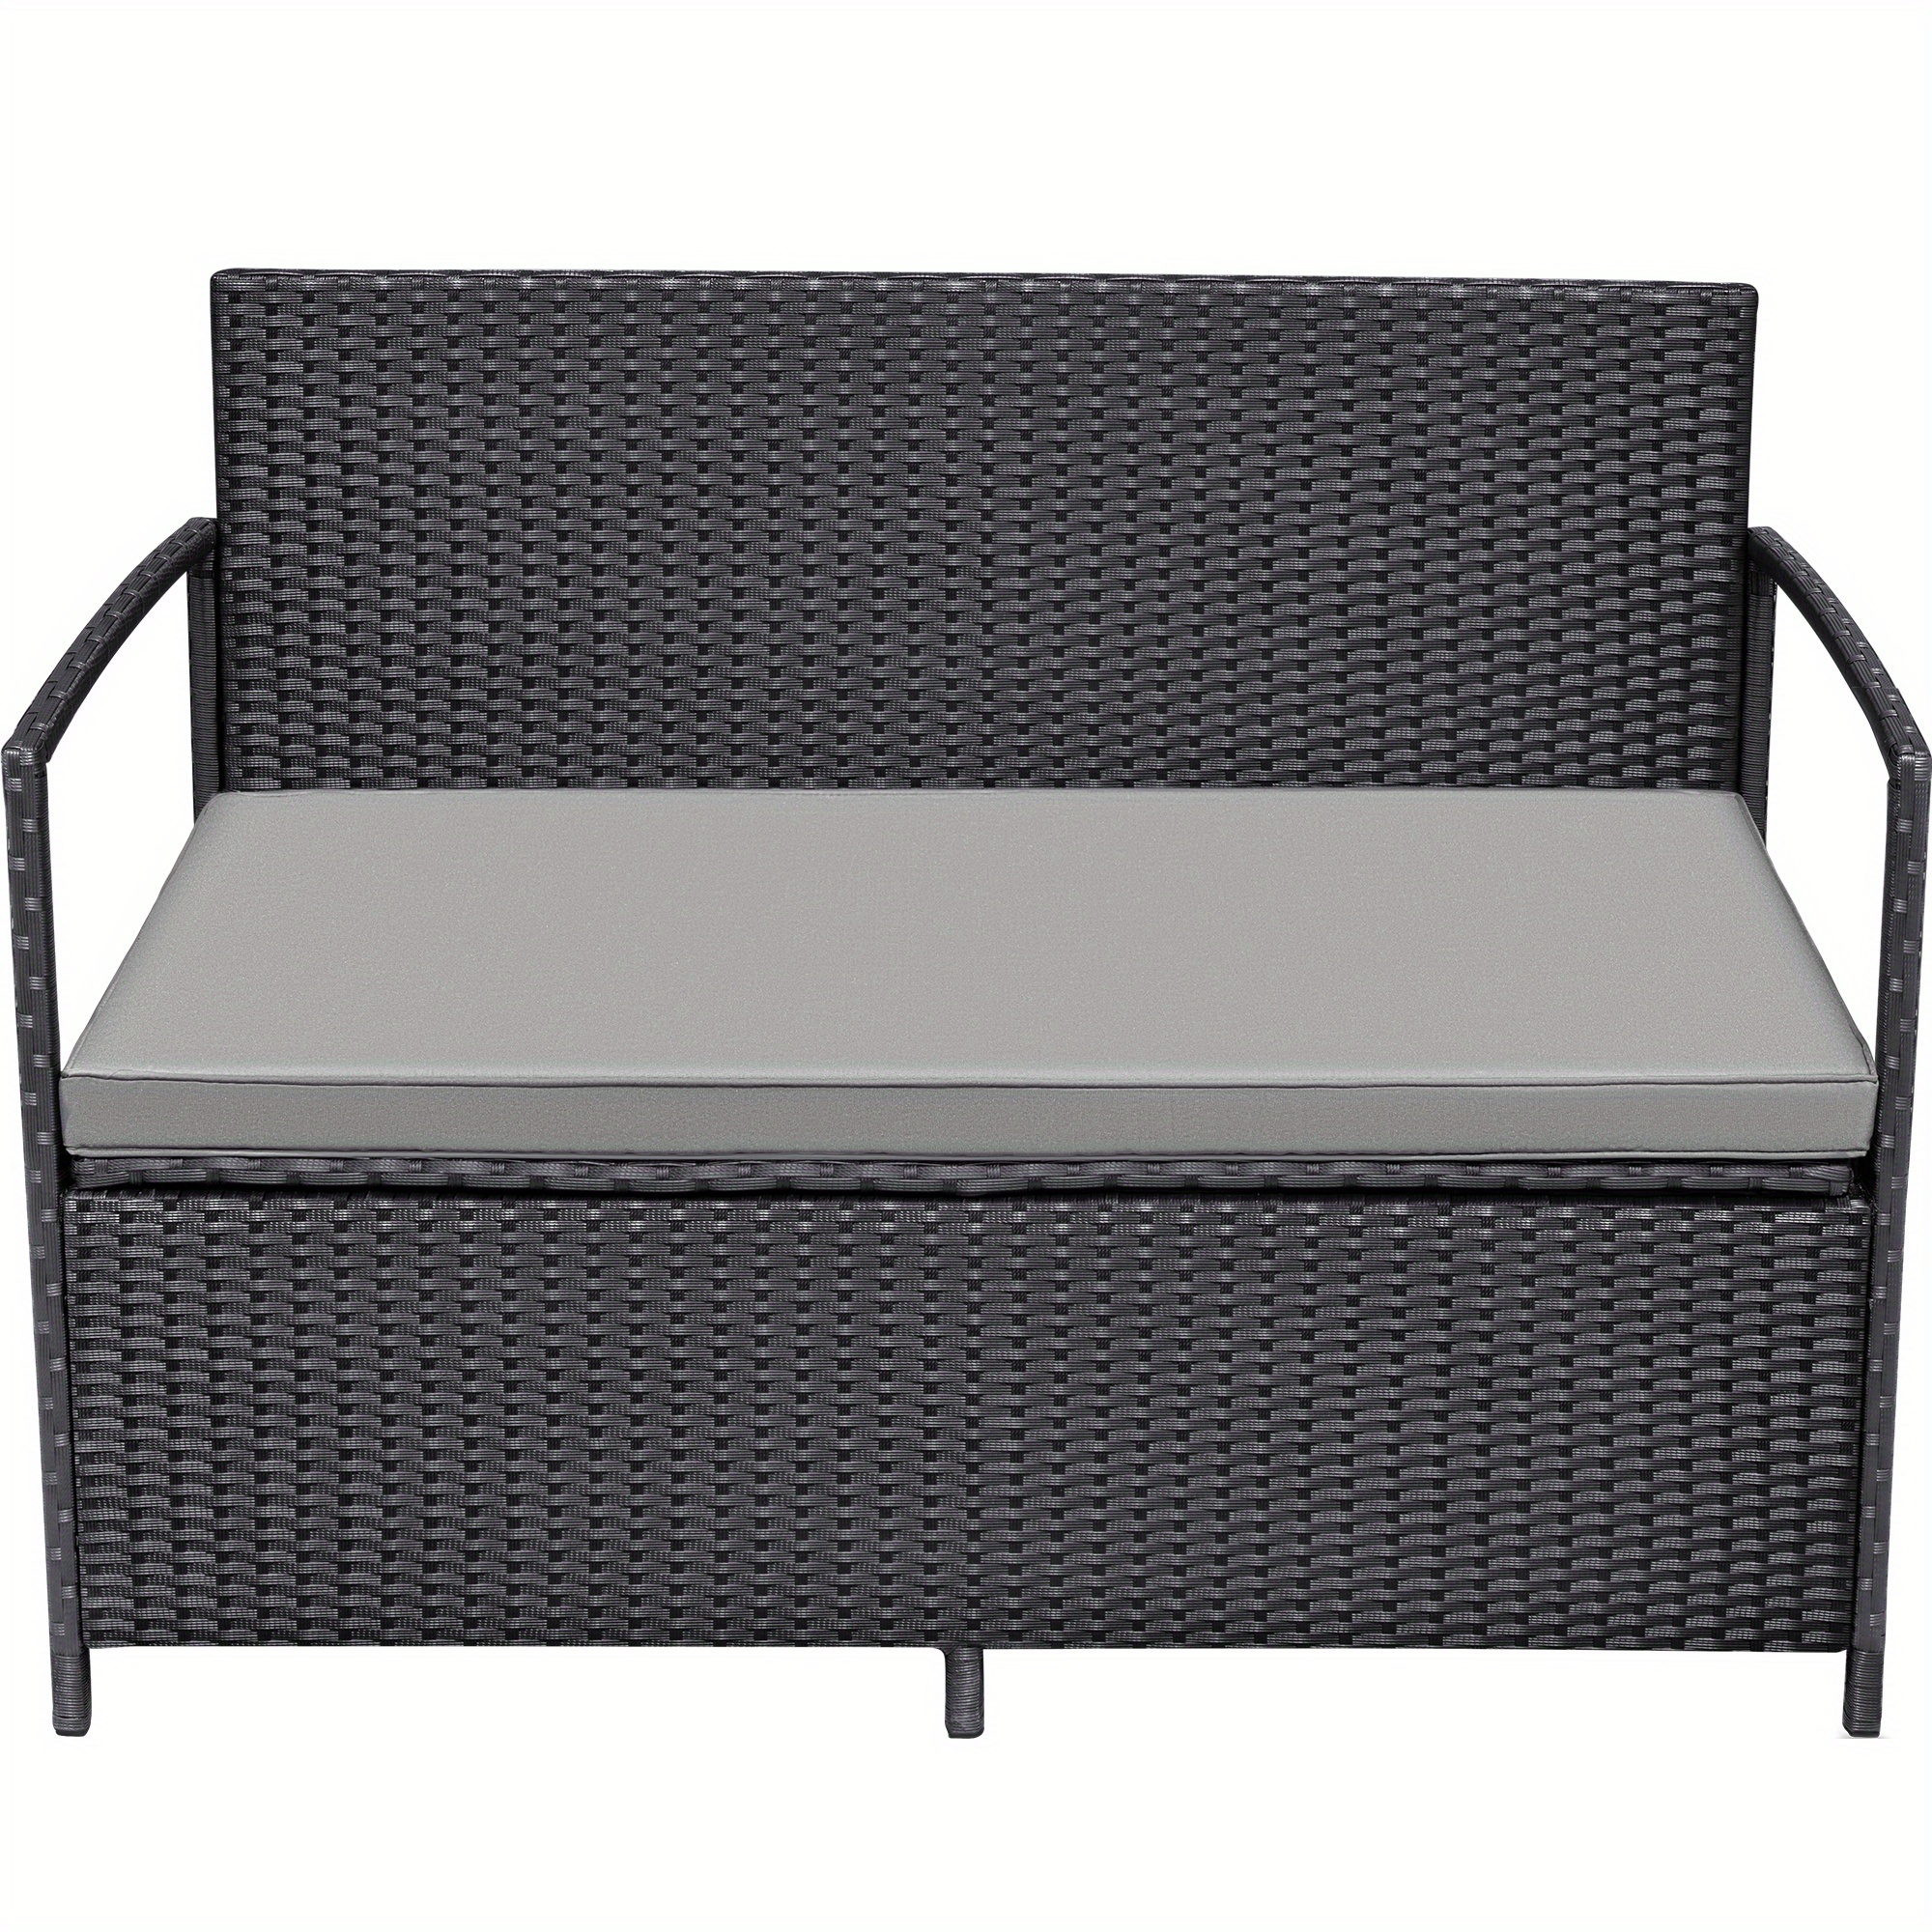 

Patio Wicker Loveseat With Cushions, 2-seat Outdoor Pe Rattan Couch, Sofa With Storage Space For Porch, Backyard, Garden, Poolside